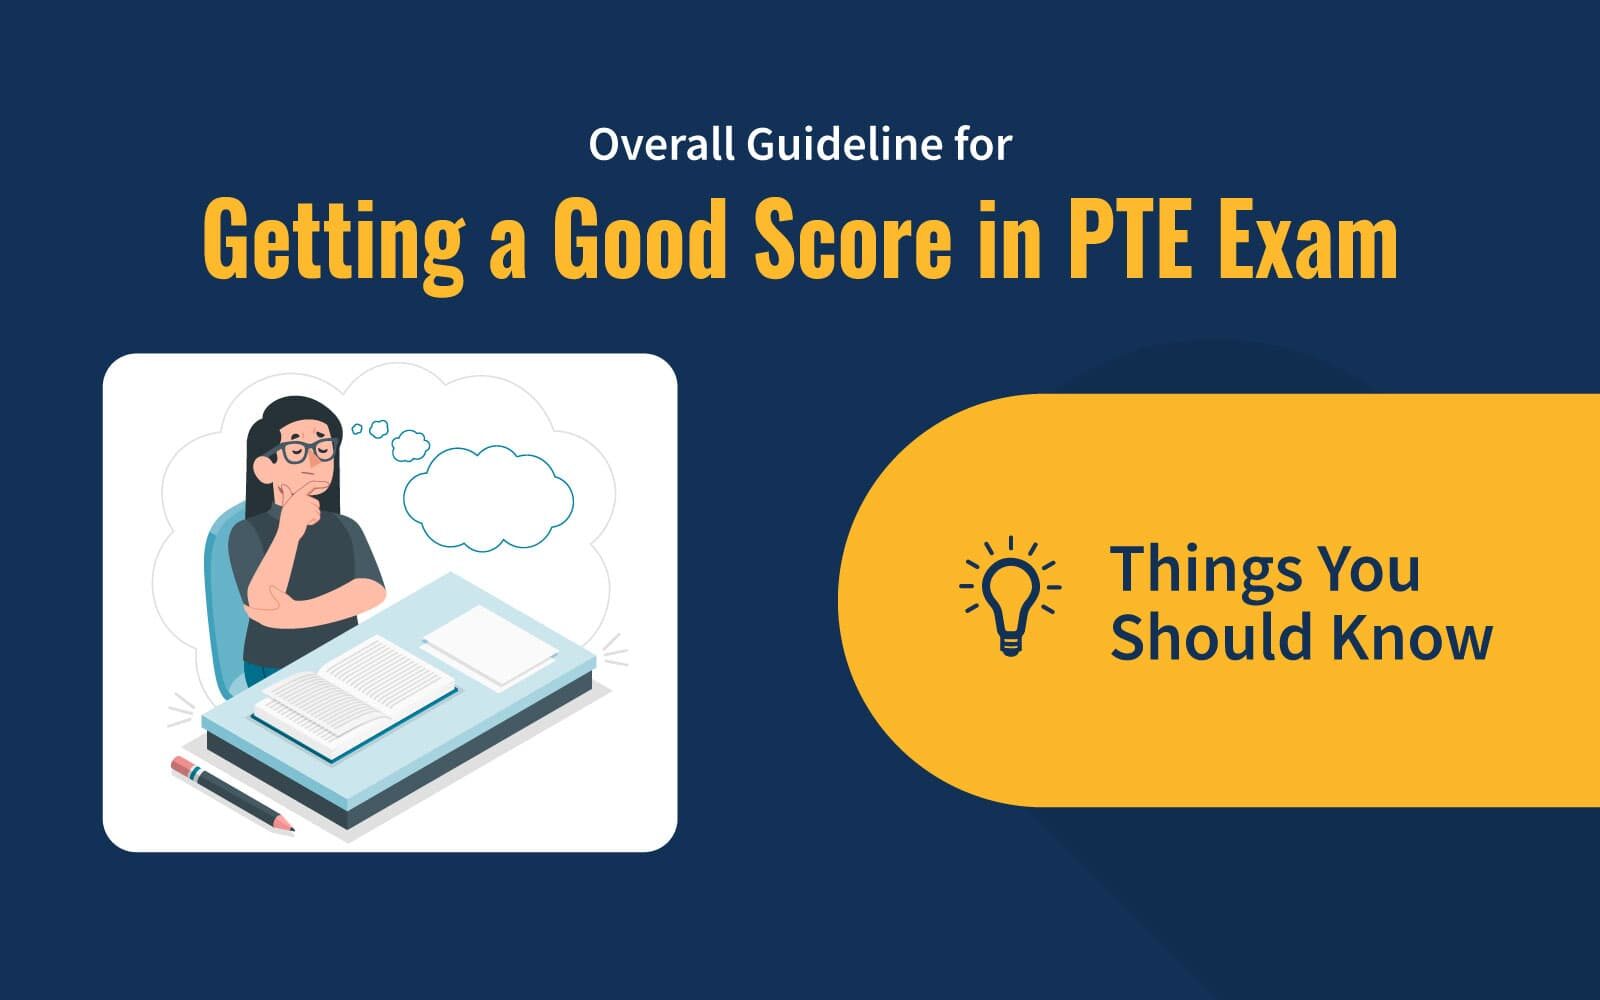 Overall Guideline for Getting a Good Score in PTE Exam